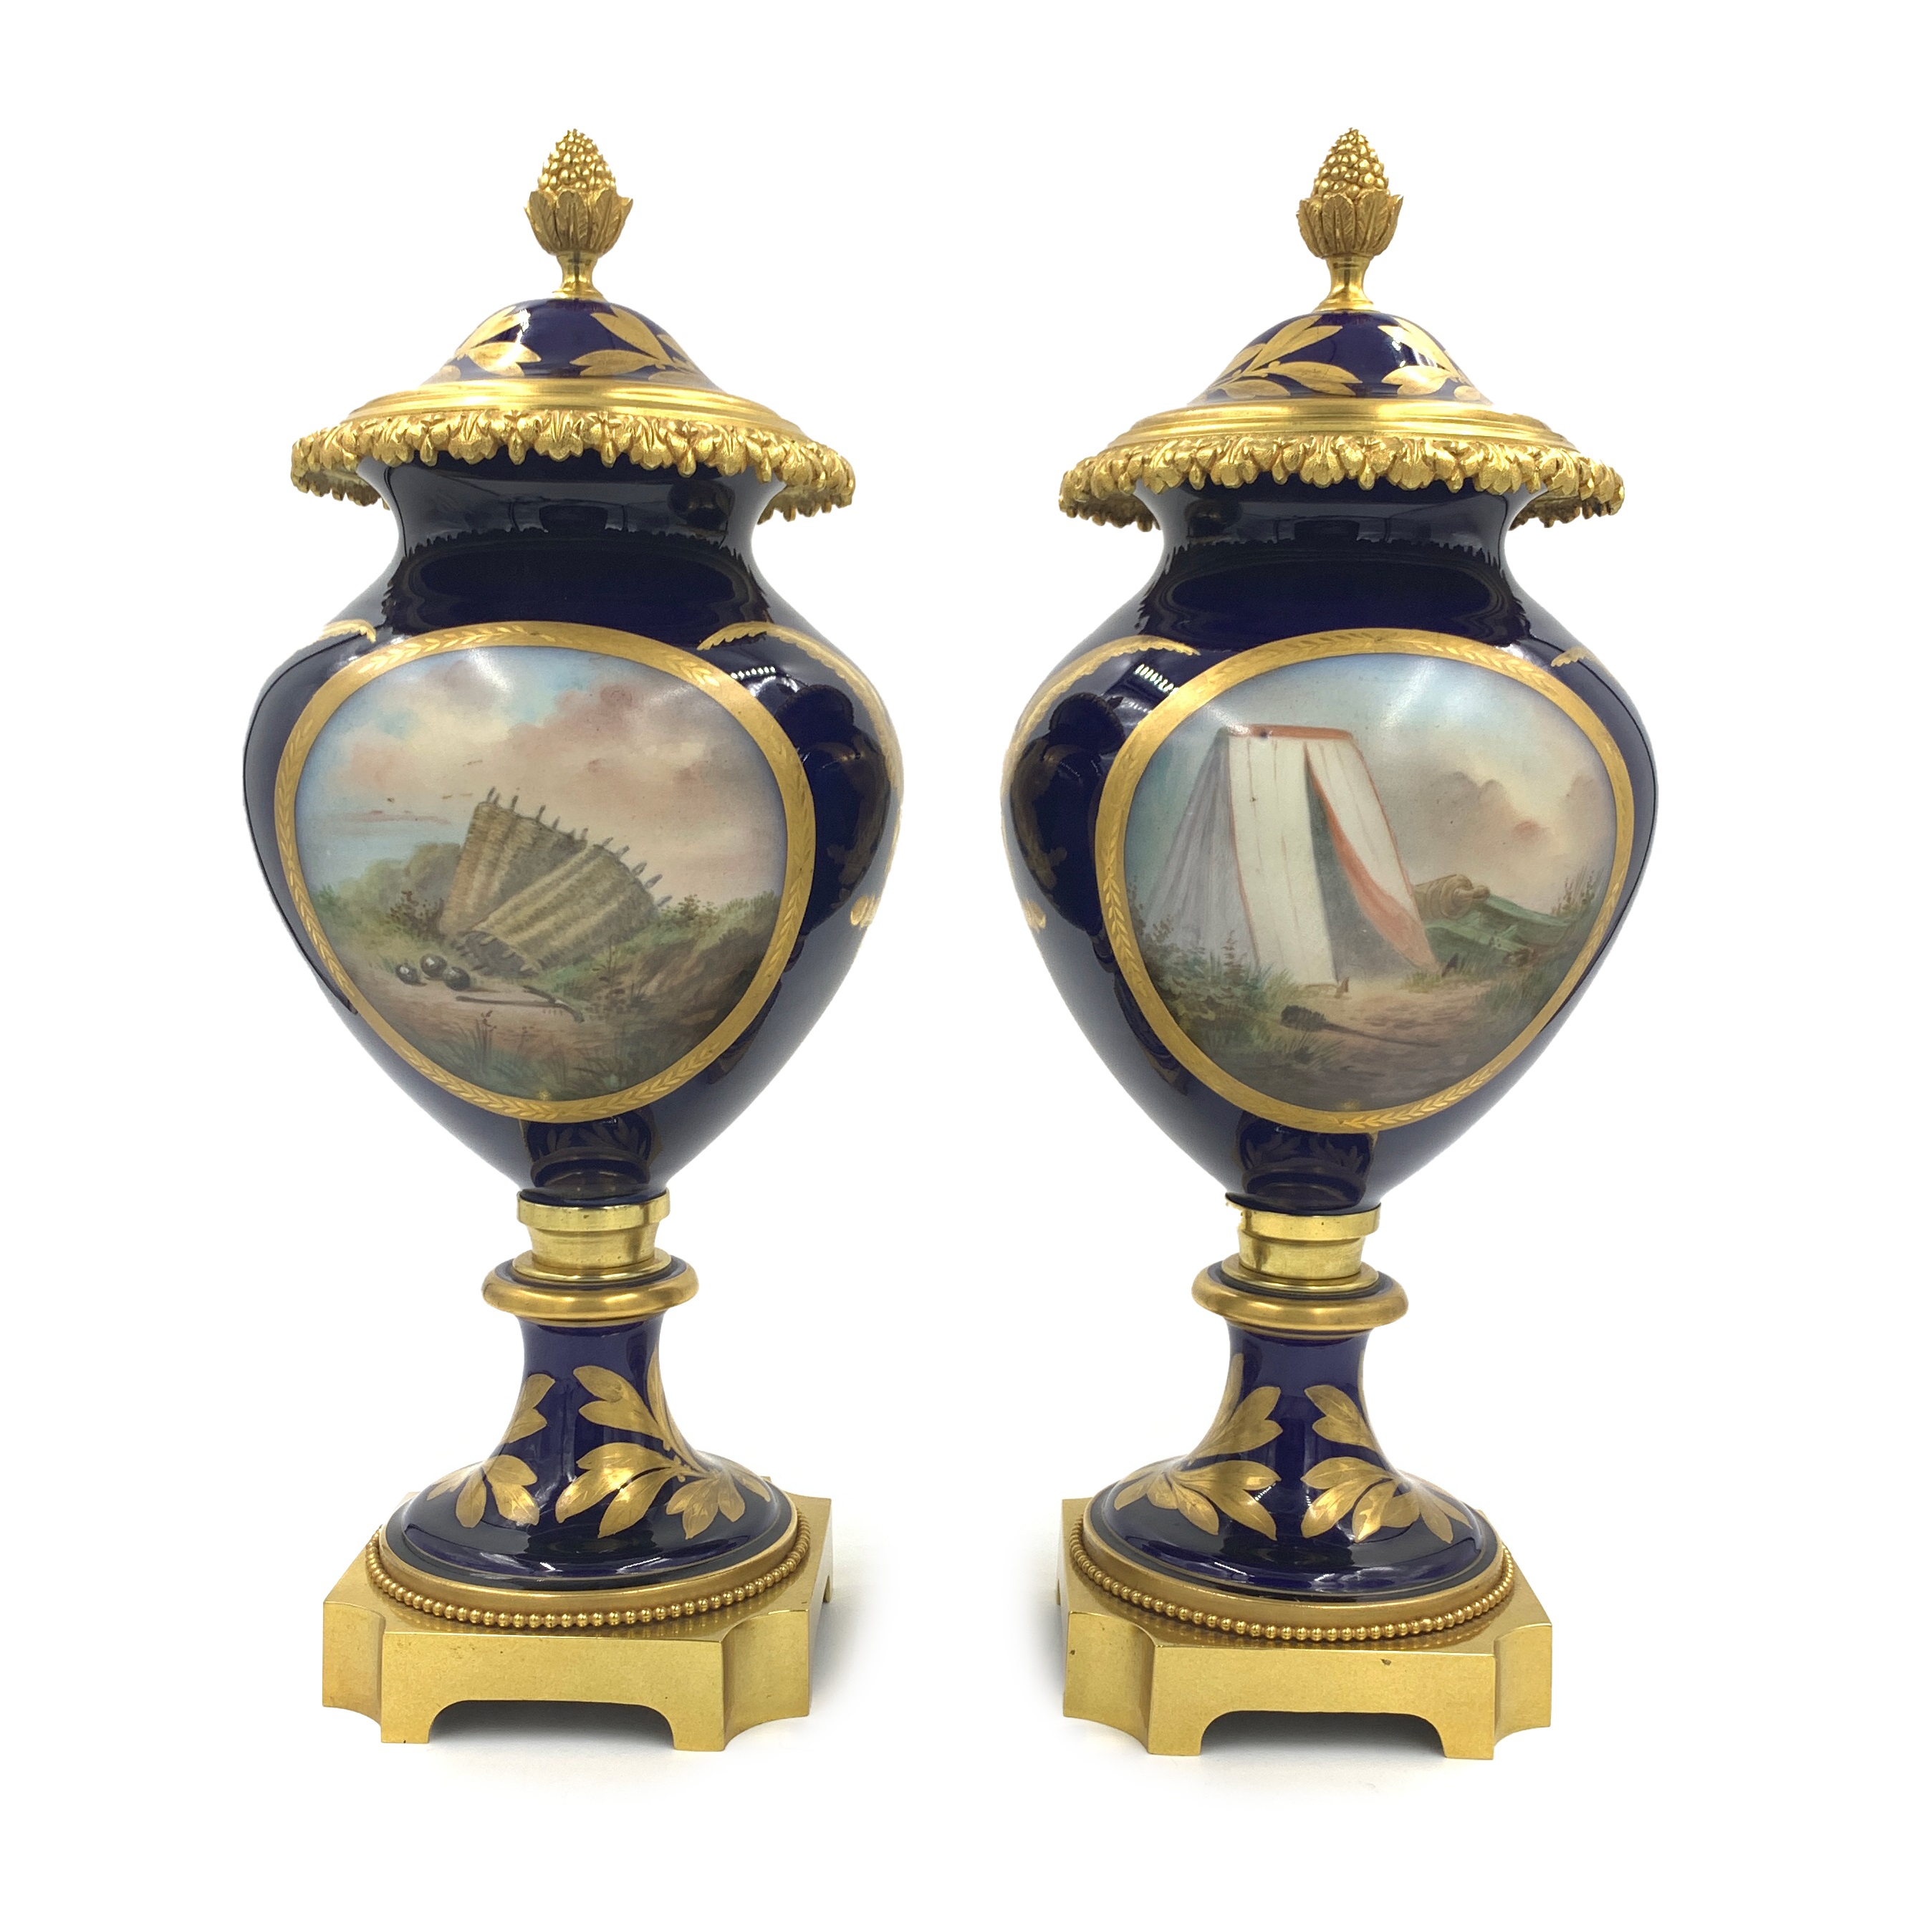 A FINE PAIR OF LATE 19TH / EARLY 20TH CENTURY SEVRES STYLE PORCELAIN NAPOLEON VASES - Image 4 of 14